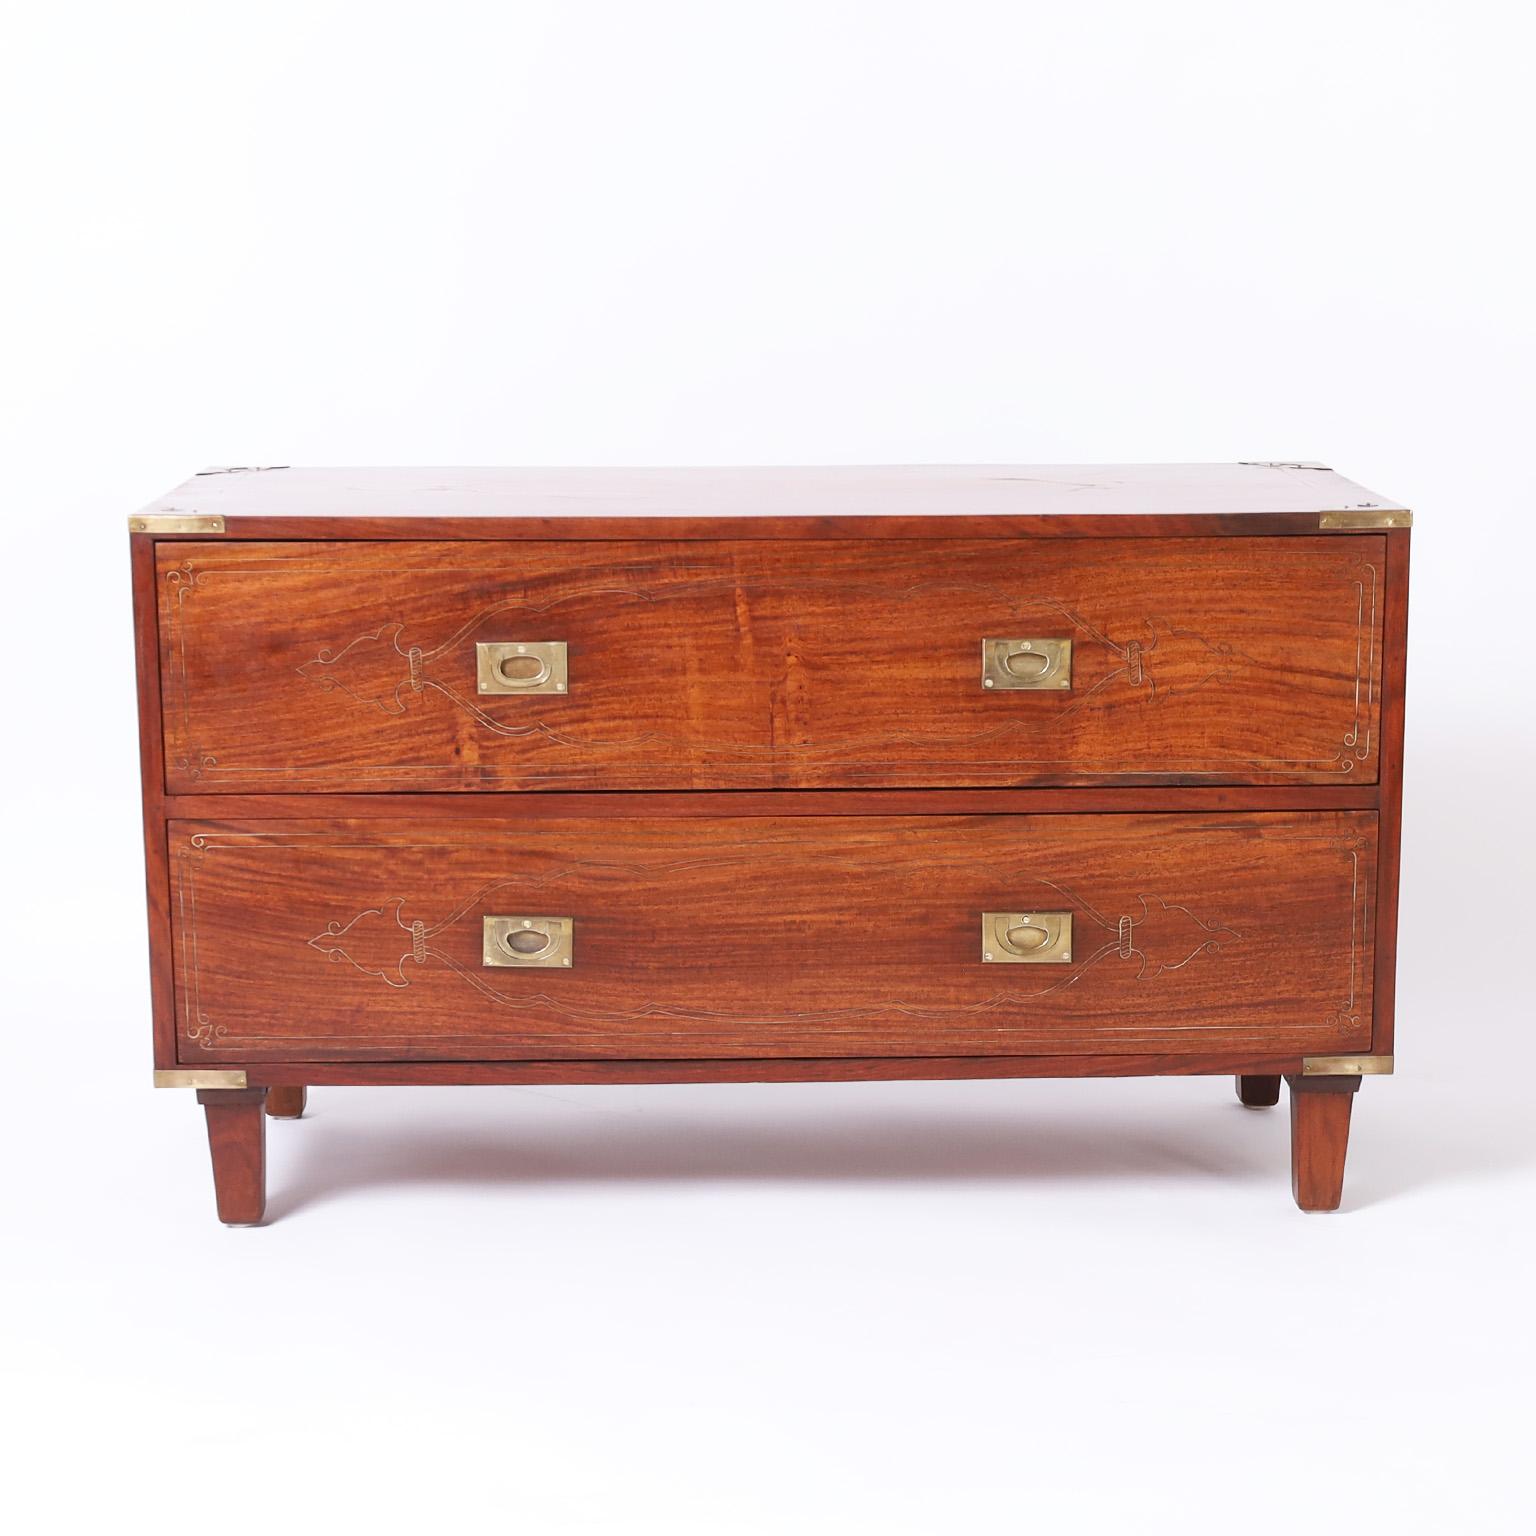 Mid century Anglo Indian chest crafted in mahogany with two drawers in a campaign style featuring brass string inlays, brass hardware, and tapered feet.